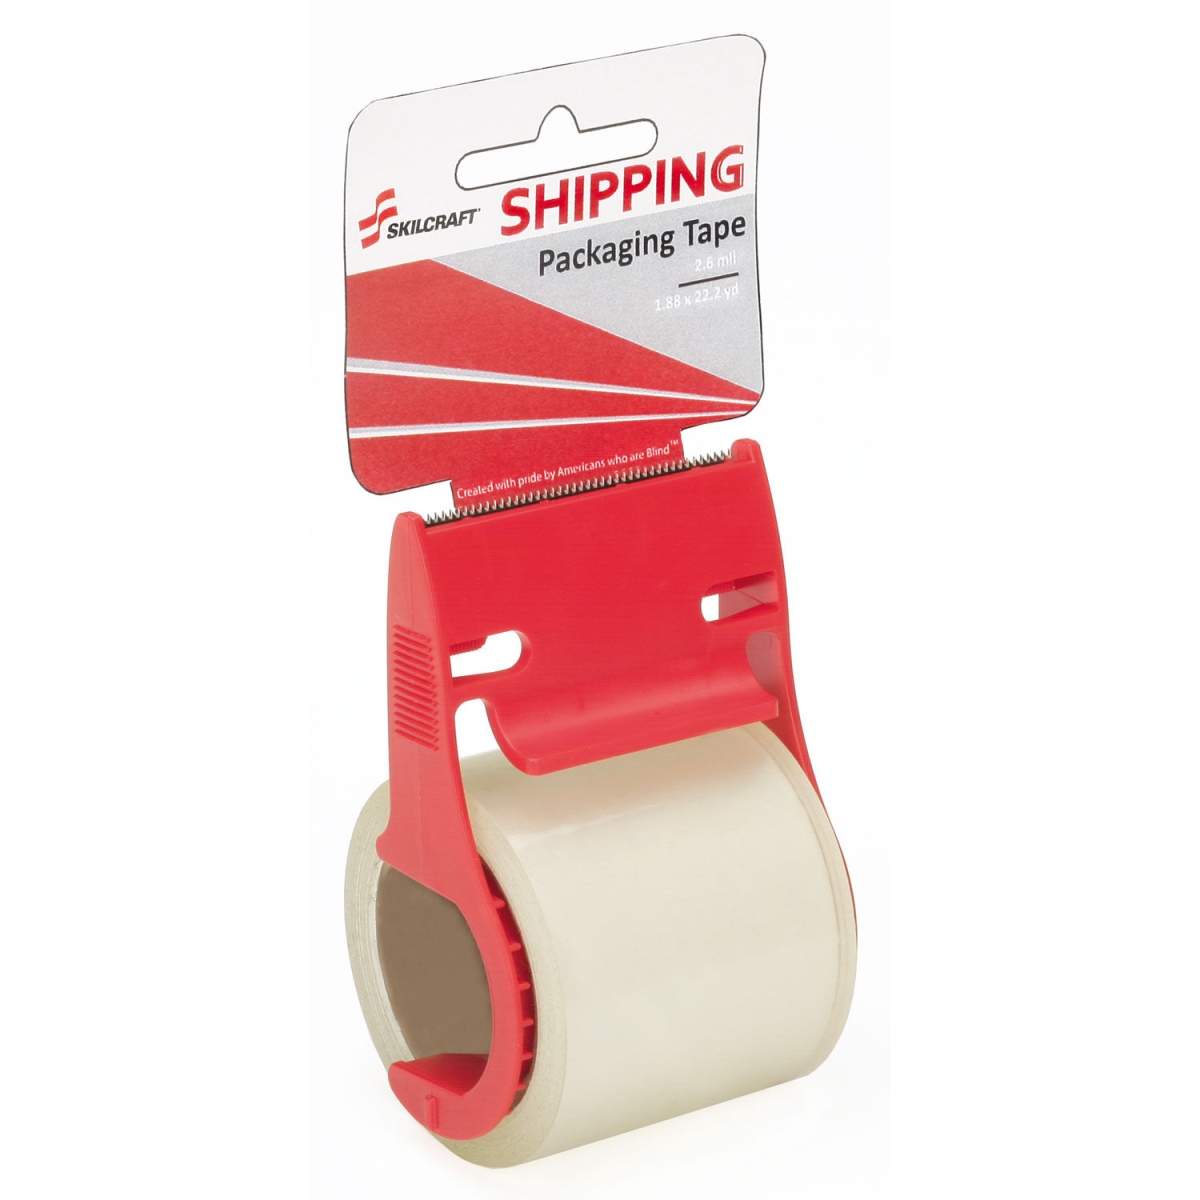 Nsn6758745 1.5 In. Skilcraft Shipping Packaging Tape With Dispenser, Clear